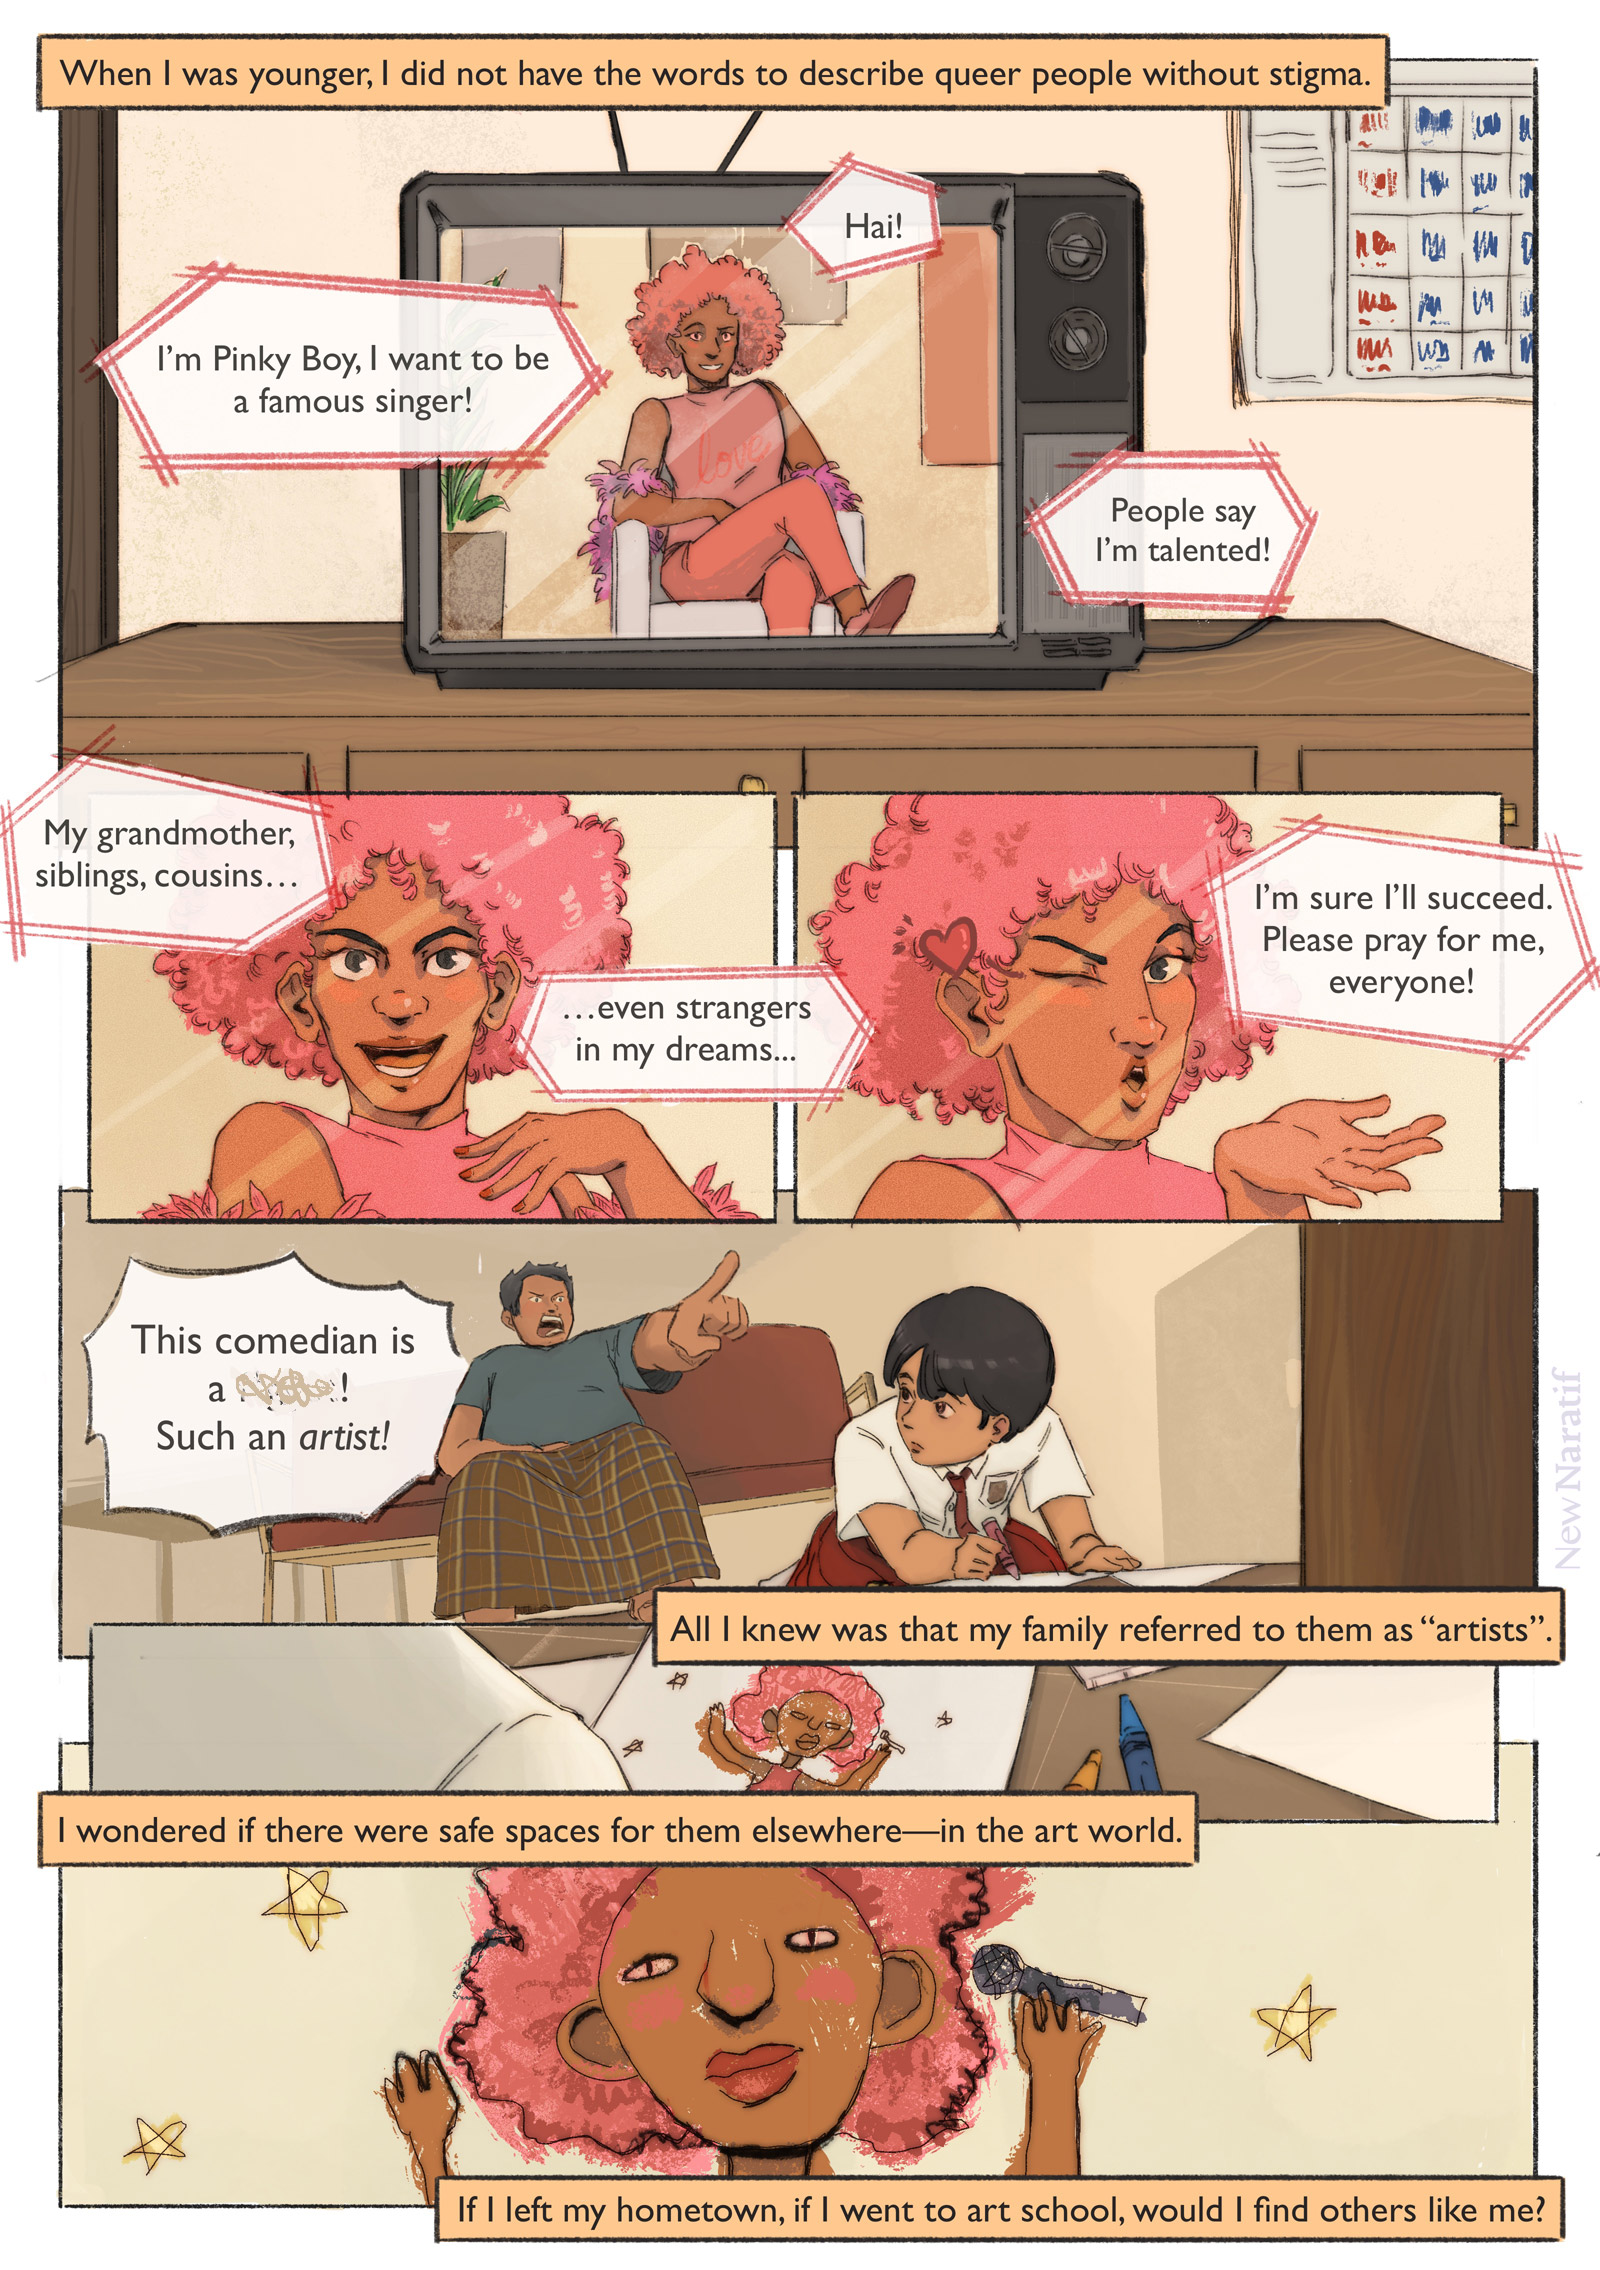 Page 1.
A comic page of 6 panels in black lines and full colour. The narration is provided in caption boxes.
Panel 1. A genderqueer-looking comedian is shown performing on TV. They wear a big frilly pink wig with a pink suit, and are sitting on a chair. They say: Hai! I’m Pinky Boy, I want to be a famous singer! Narrator: When I was younger, I did not have the words to describe queer people without stigma.
Panel 2. Close-up on Pinky Boy's determined face. They say: People say I’m talented! My grandmother, siblings, cousins, even strangers in my dreams...
Panel 3. Pinky Boy blows a kiss to the audience. I’m sure I’ll succeed. Please pray for me, everyone!
Panel 4. We see a man wearing a sarong, angrily pointing at the TV while shouting: "This comedian is a ******! Such an artist!" The main character, who is a little girl, is on the floor drawing while looking at the TV.
Panel 5. We see what she's drawing—it's Pinky Boy. Narrator: All I knew was that my family referred to them as “artists”.
Panel 6. Close-up on the drawing. Narrator: I wondered if there were safe spaces for them elsewhere—in the art world. If I left my hometown, if I went to art school, would I find others like me?